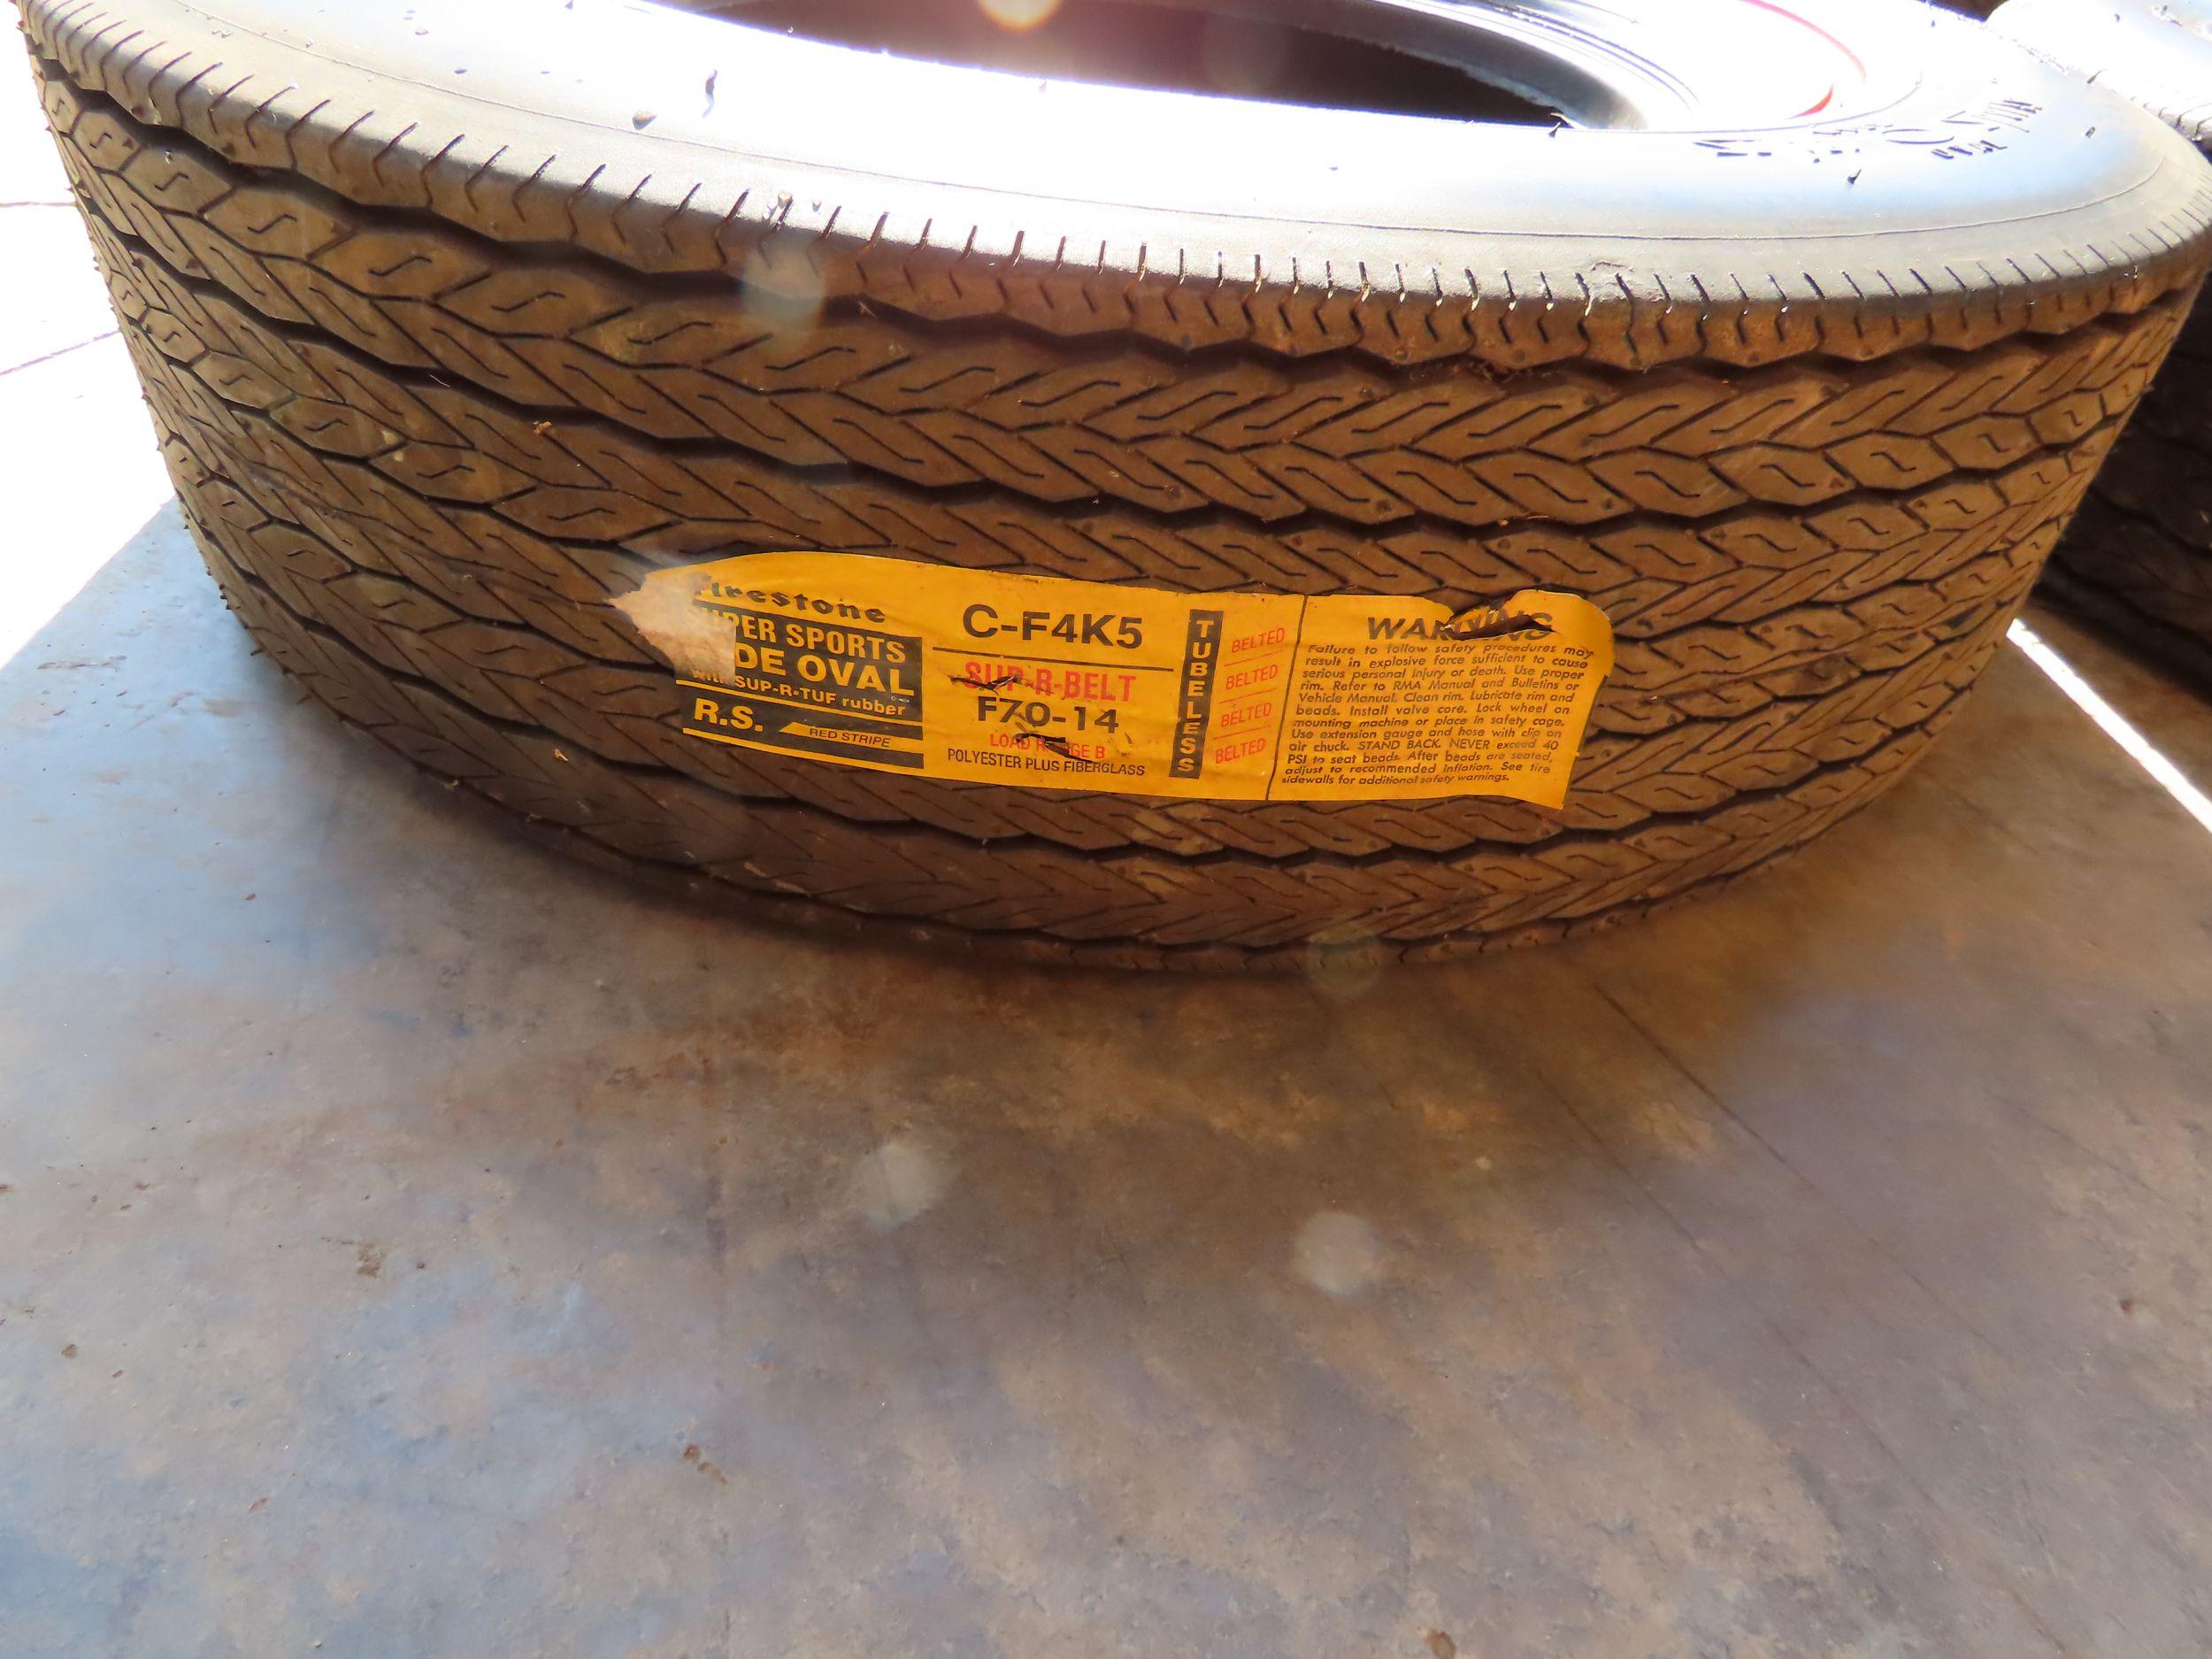 New Set of Goodyear Bias Ply Tires F70-14